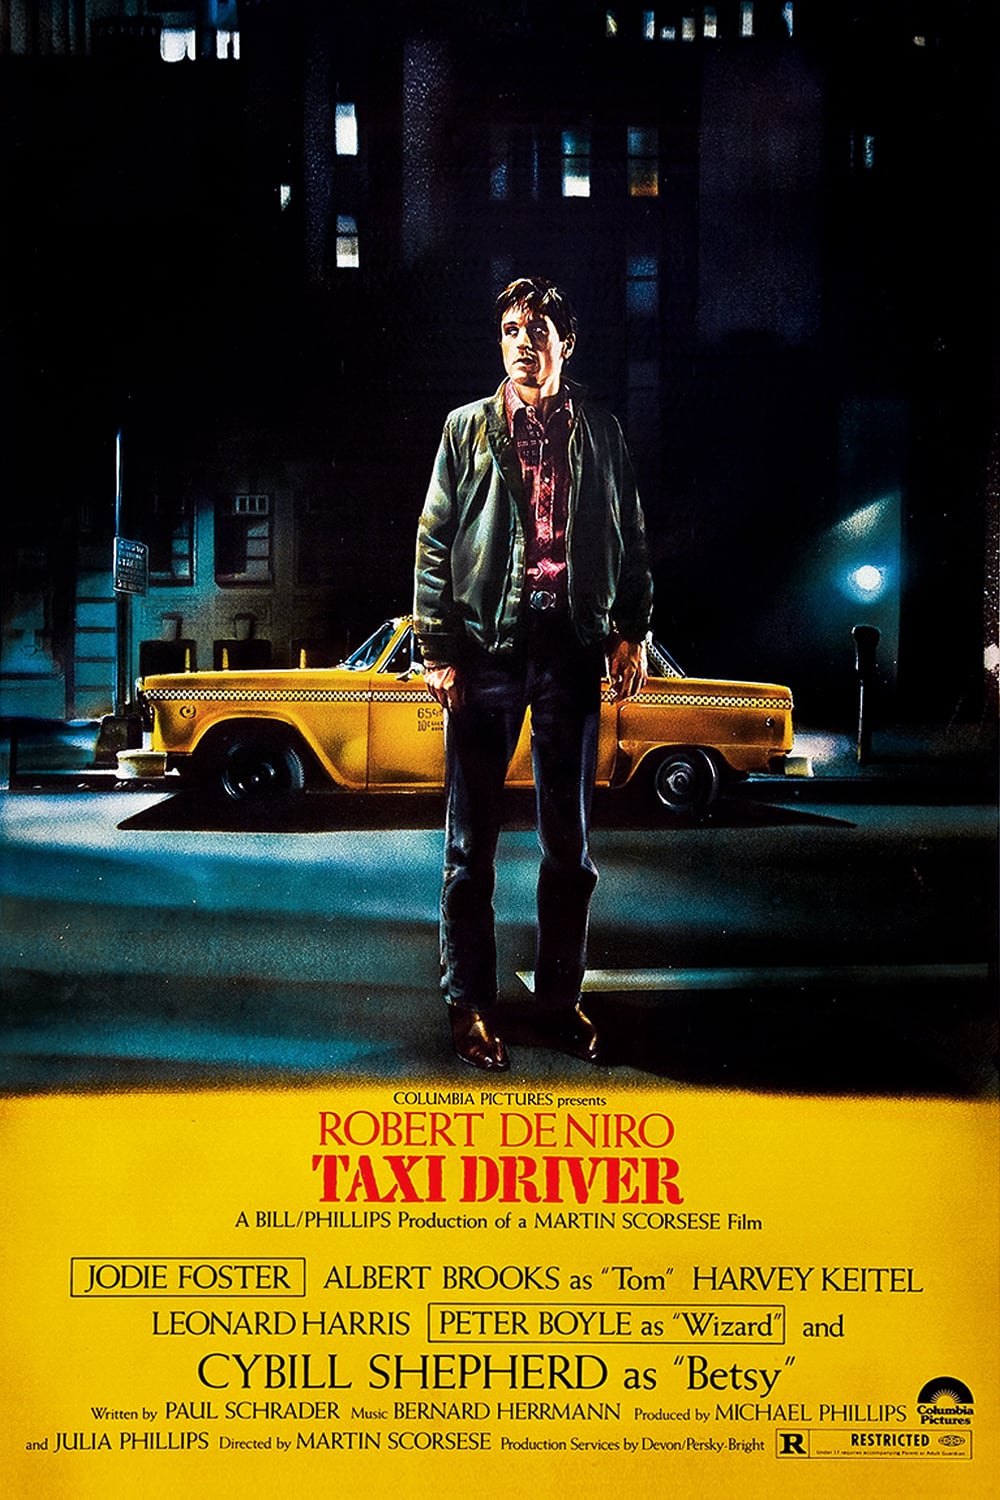 https://static.wikia.nocookie.net/filmguide/images/9/92/Taxi_Driver_poster.jpeg/revision/latest?cb=20200309044928